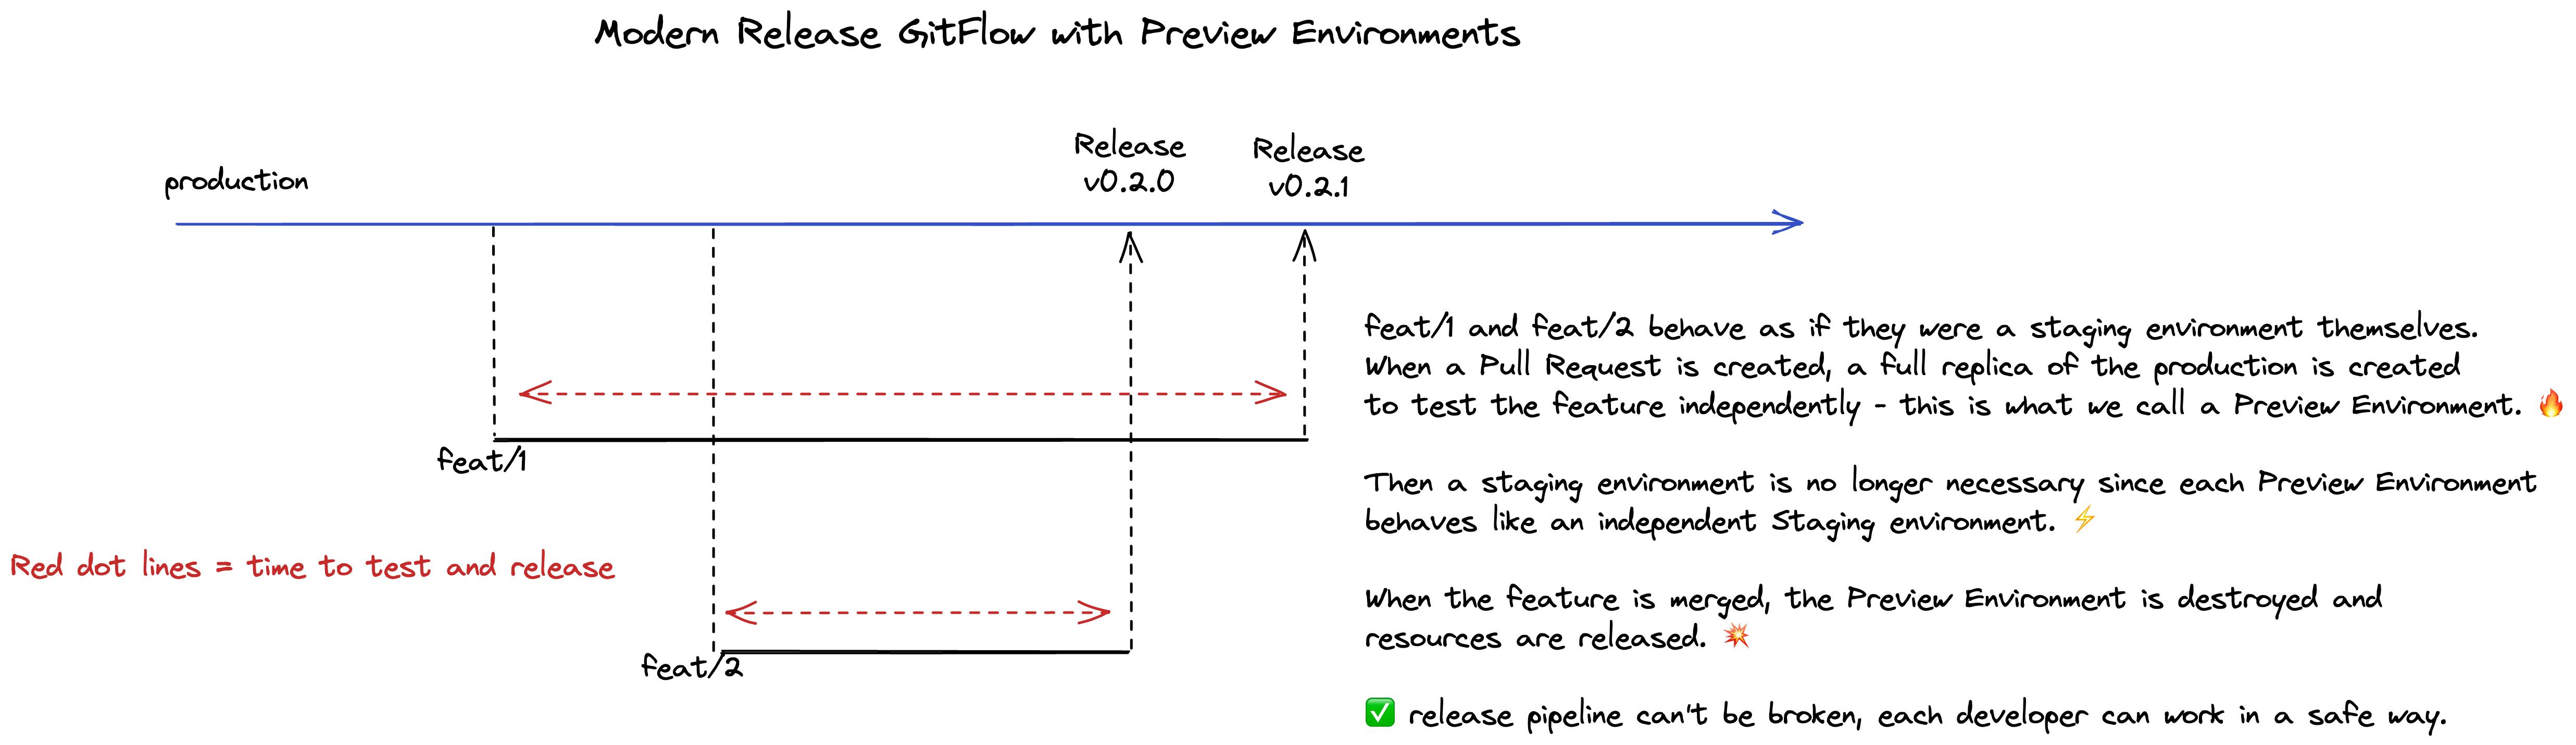 Modern Release GitFlow with Preview Environments